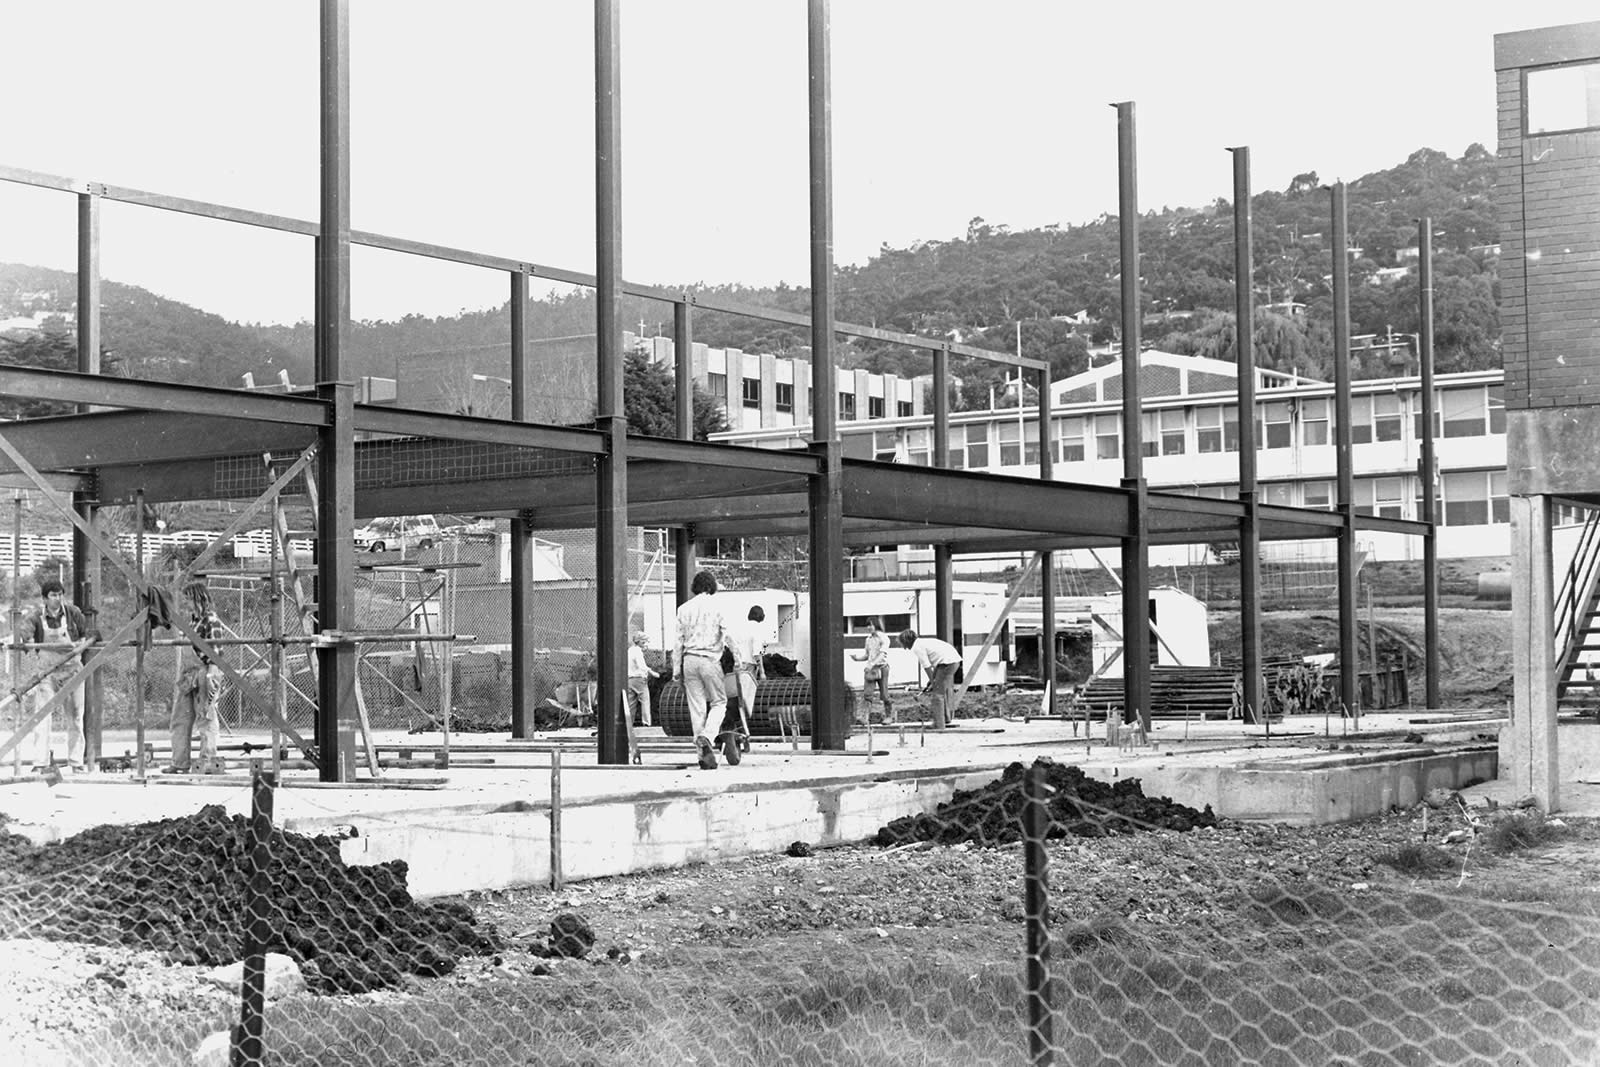 1979 construction of the new Middle School